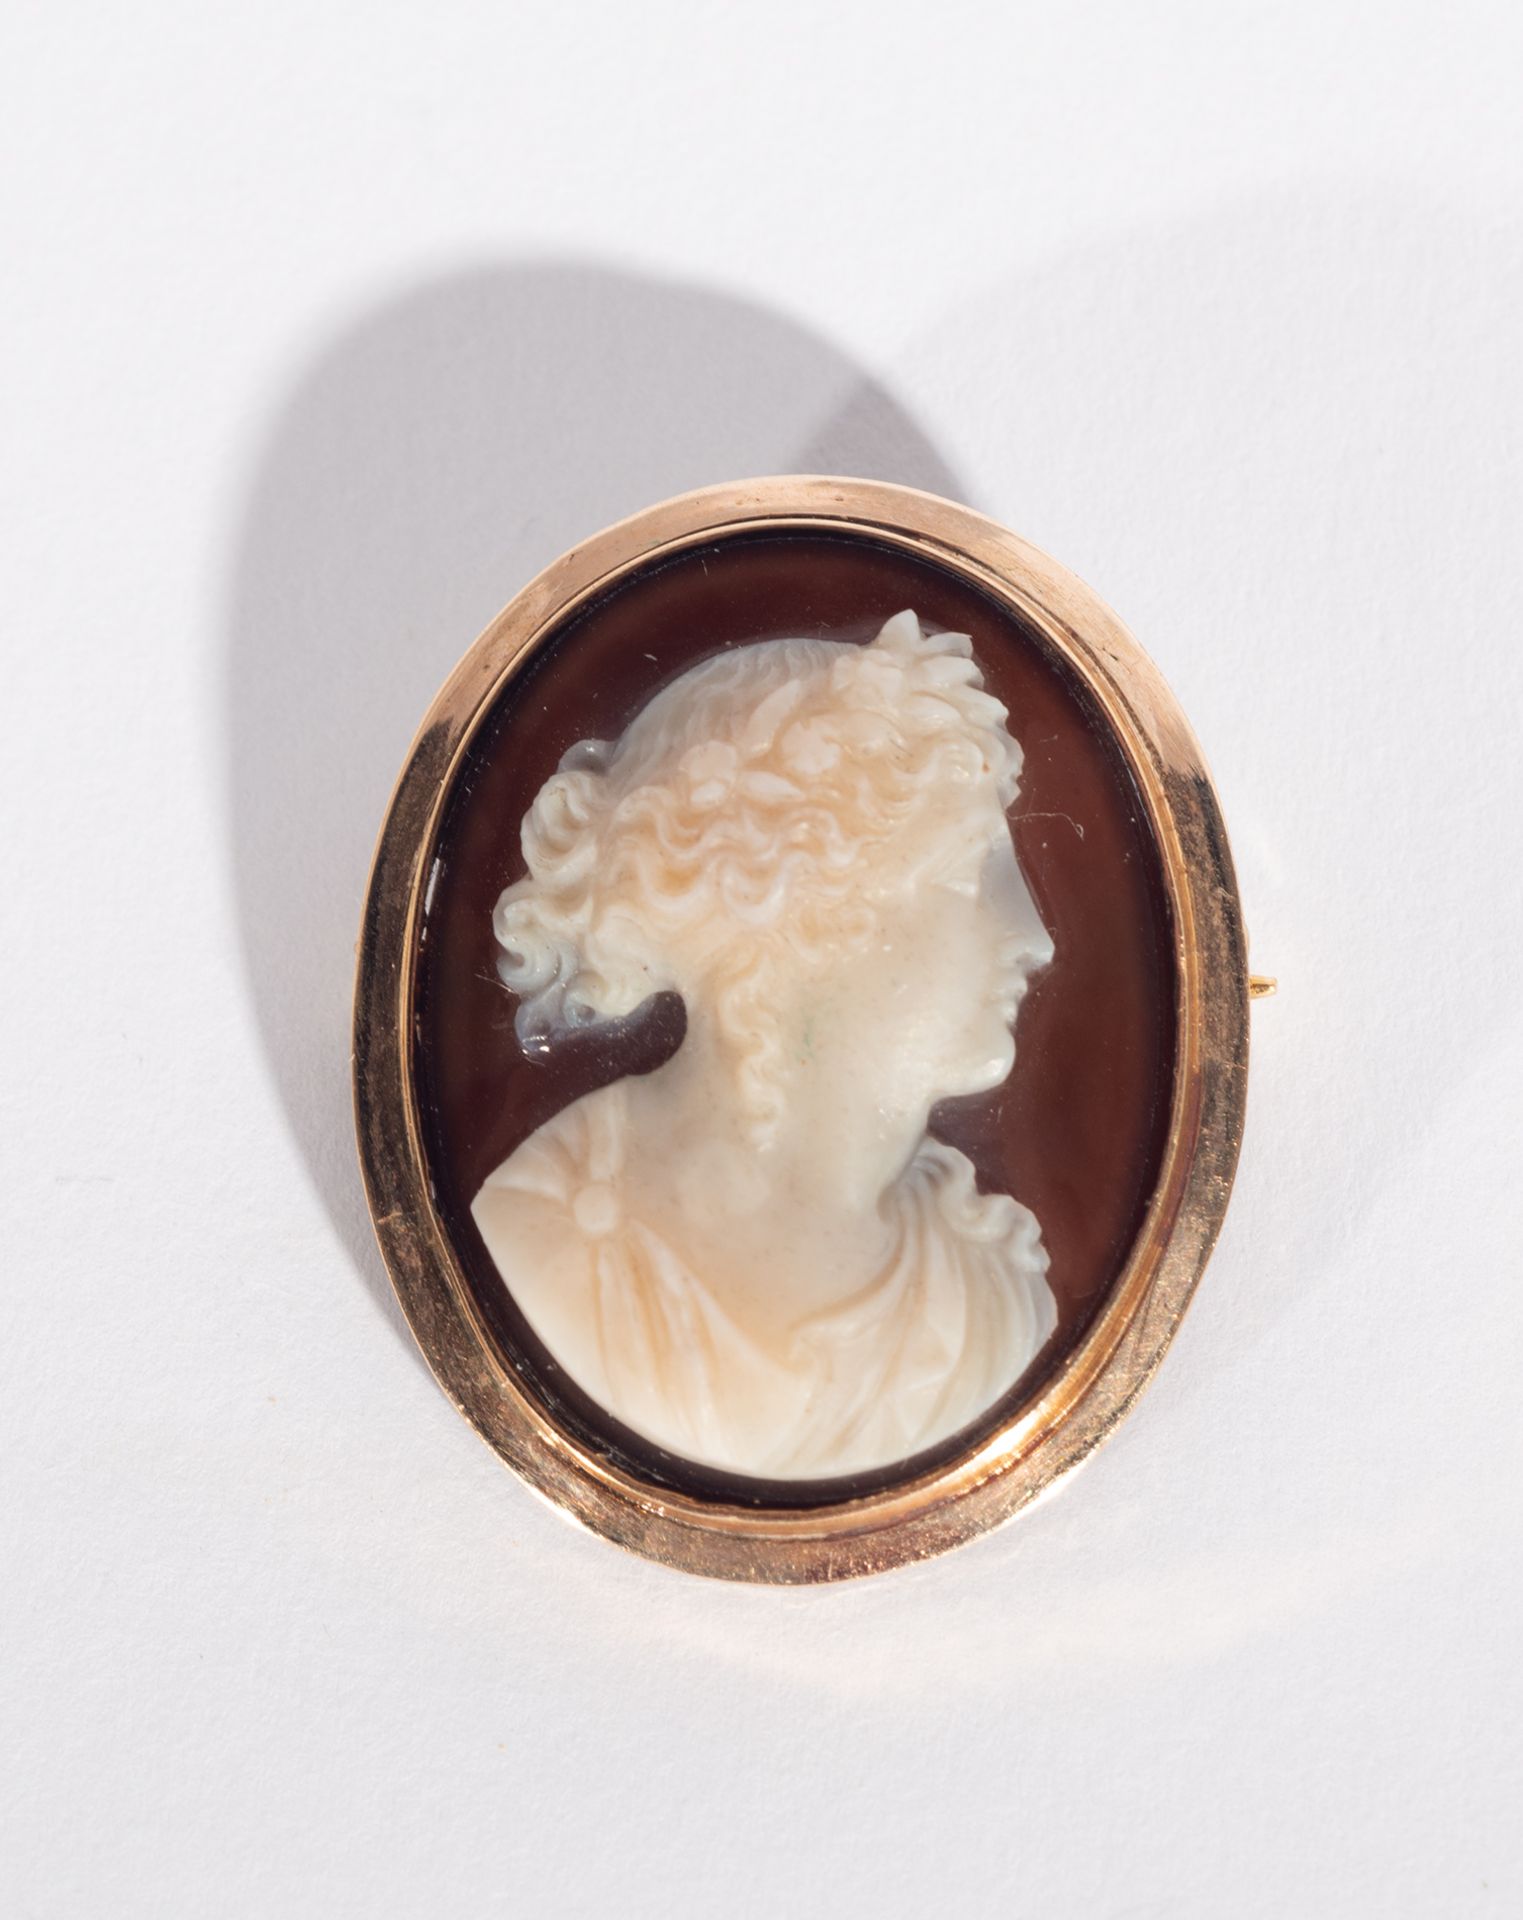 Gold brooch with Lady's Cameo, 19th century